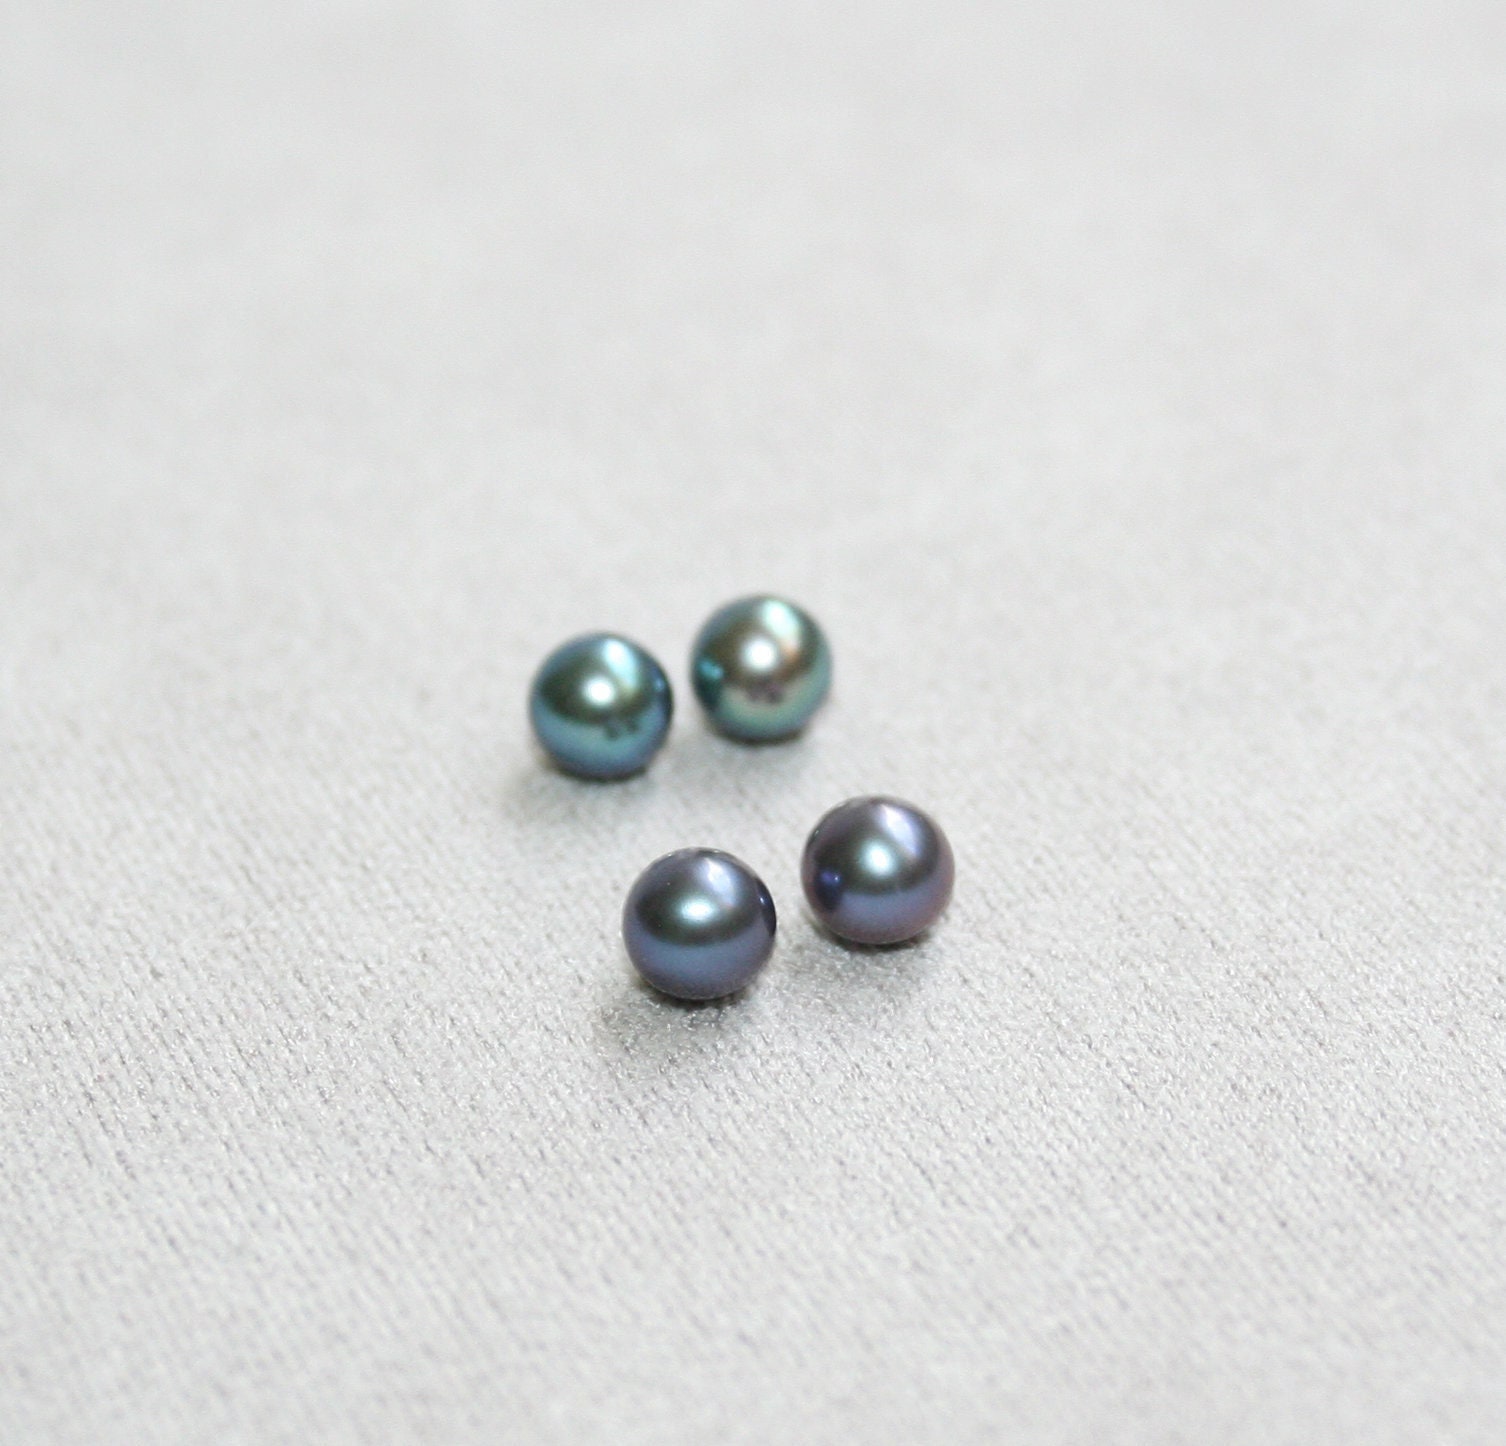 AA+ 6-6.5mm round black pearls, half drilled round freshwater loose pearl  beads wholesale, genuine high quality round pearls, FLR6065-B